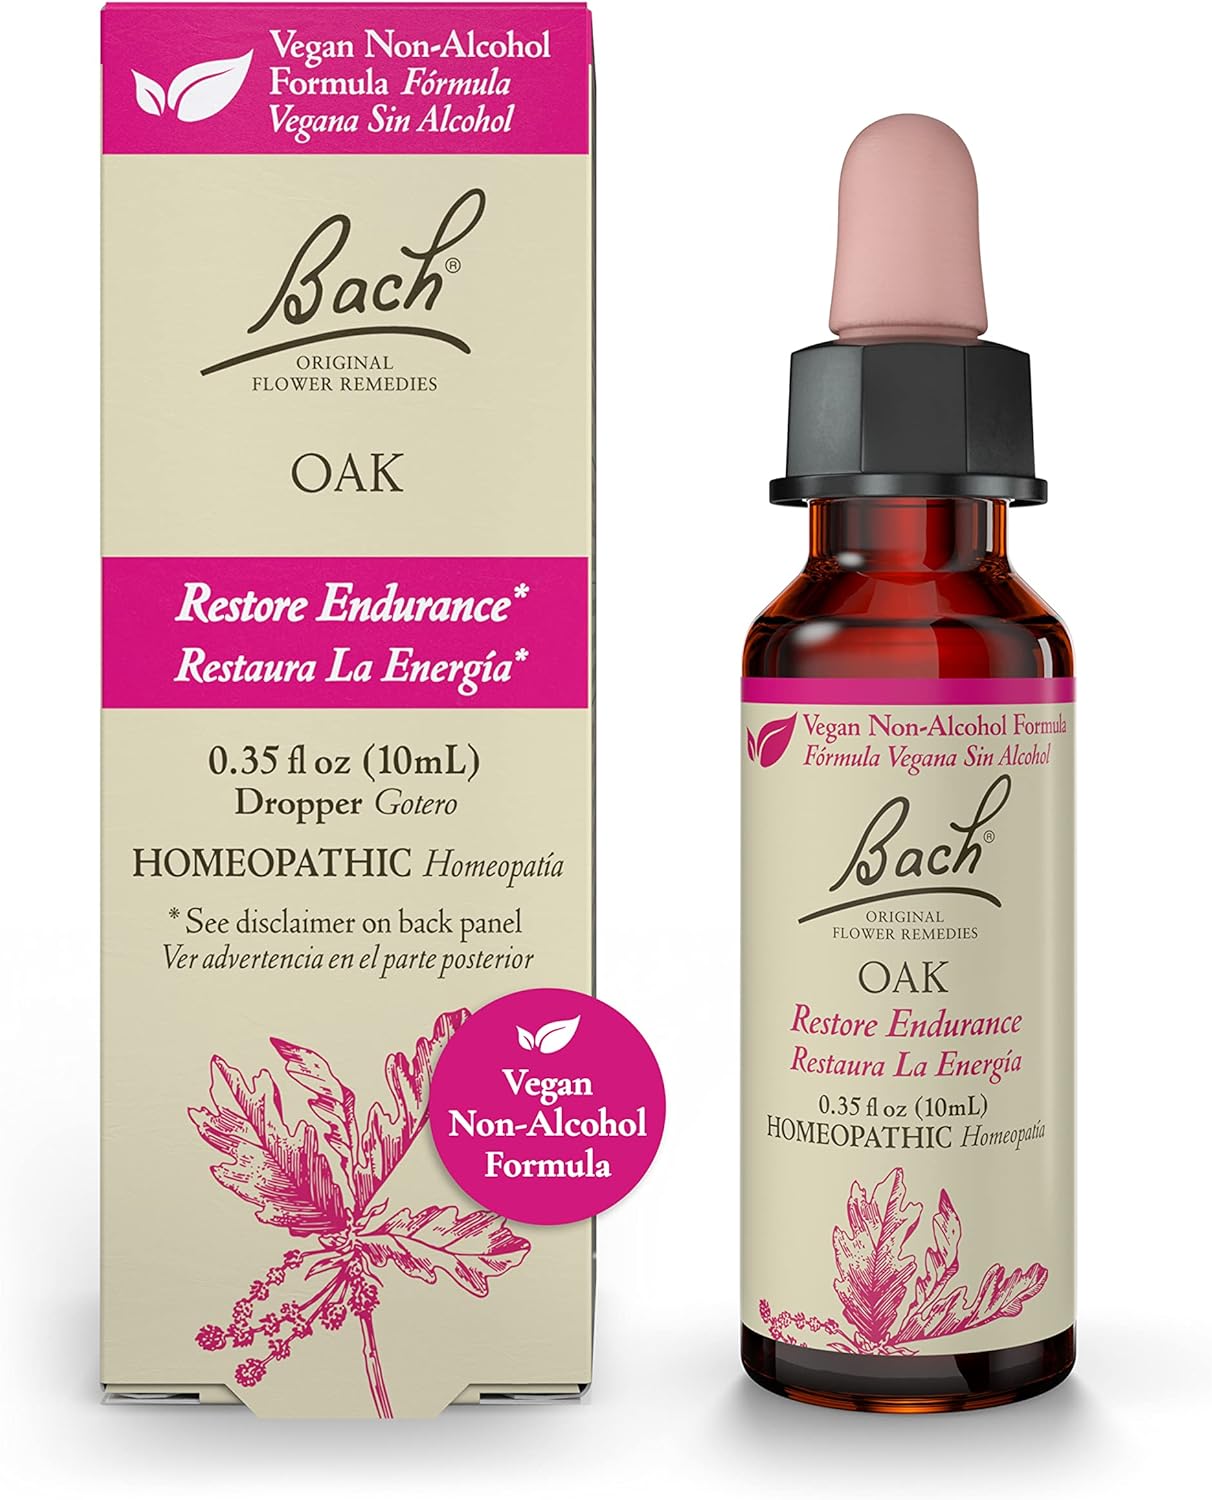 Bach Original Flower Remedies, Oak for Endurance and Strength (Non-Alcohol Formula), Natural Homeopathic Flower Essence, Holistic Wellness and Stress Relief, Vegan, 10mL Dropper